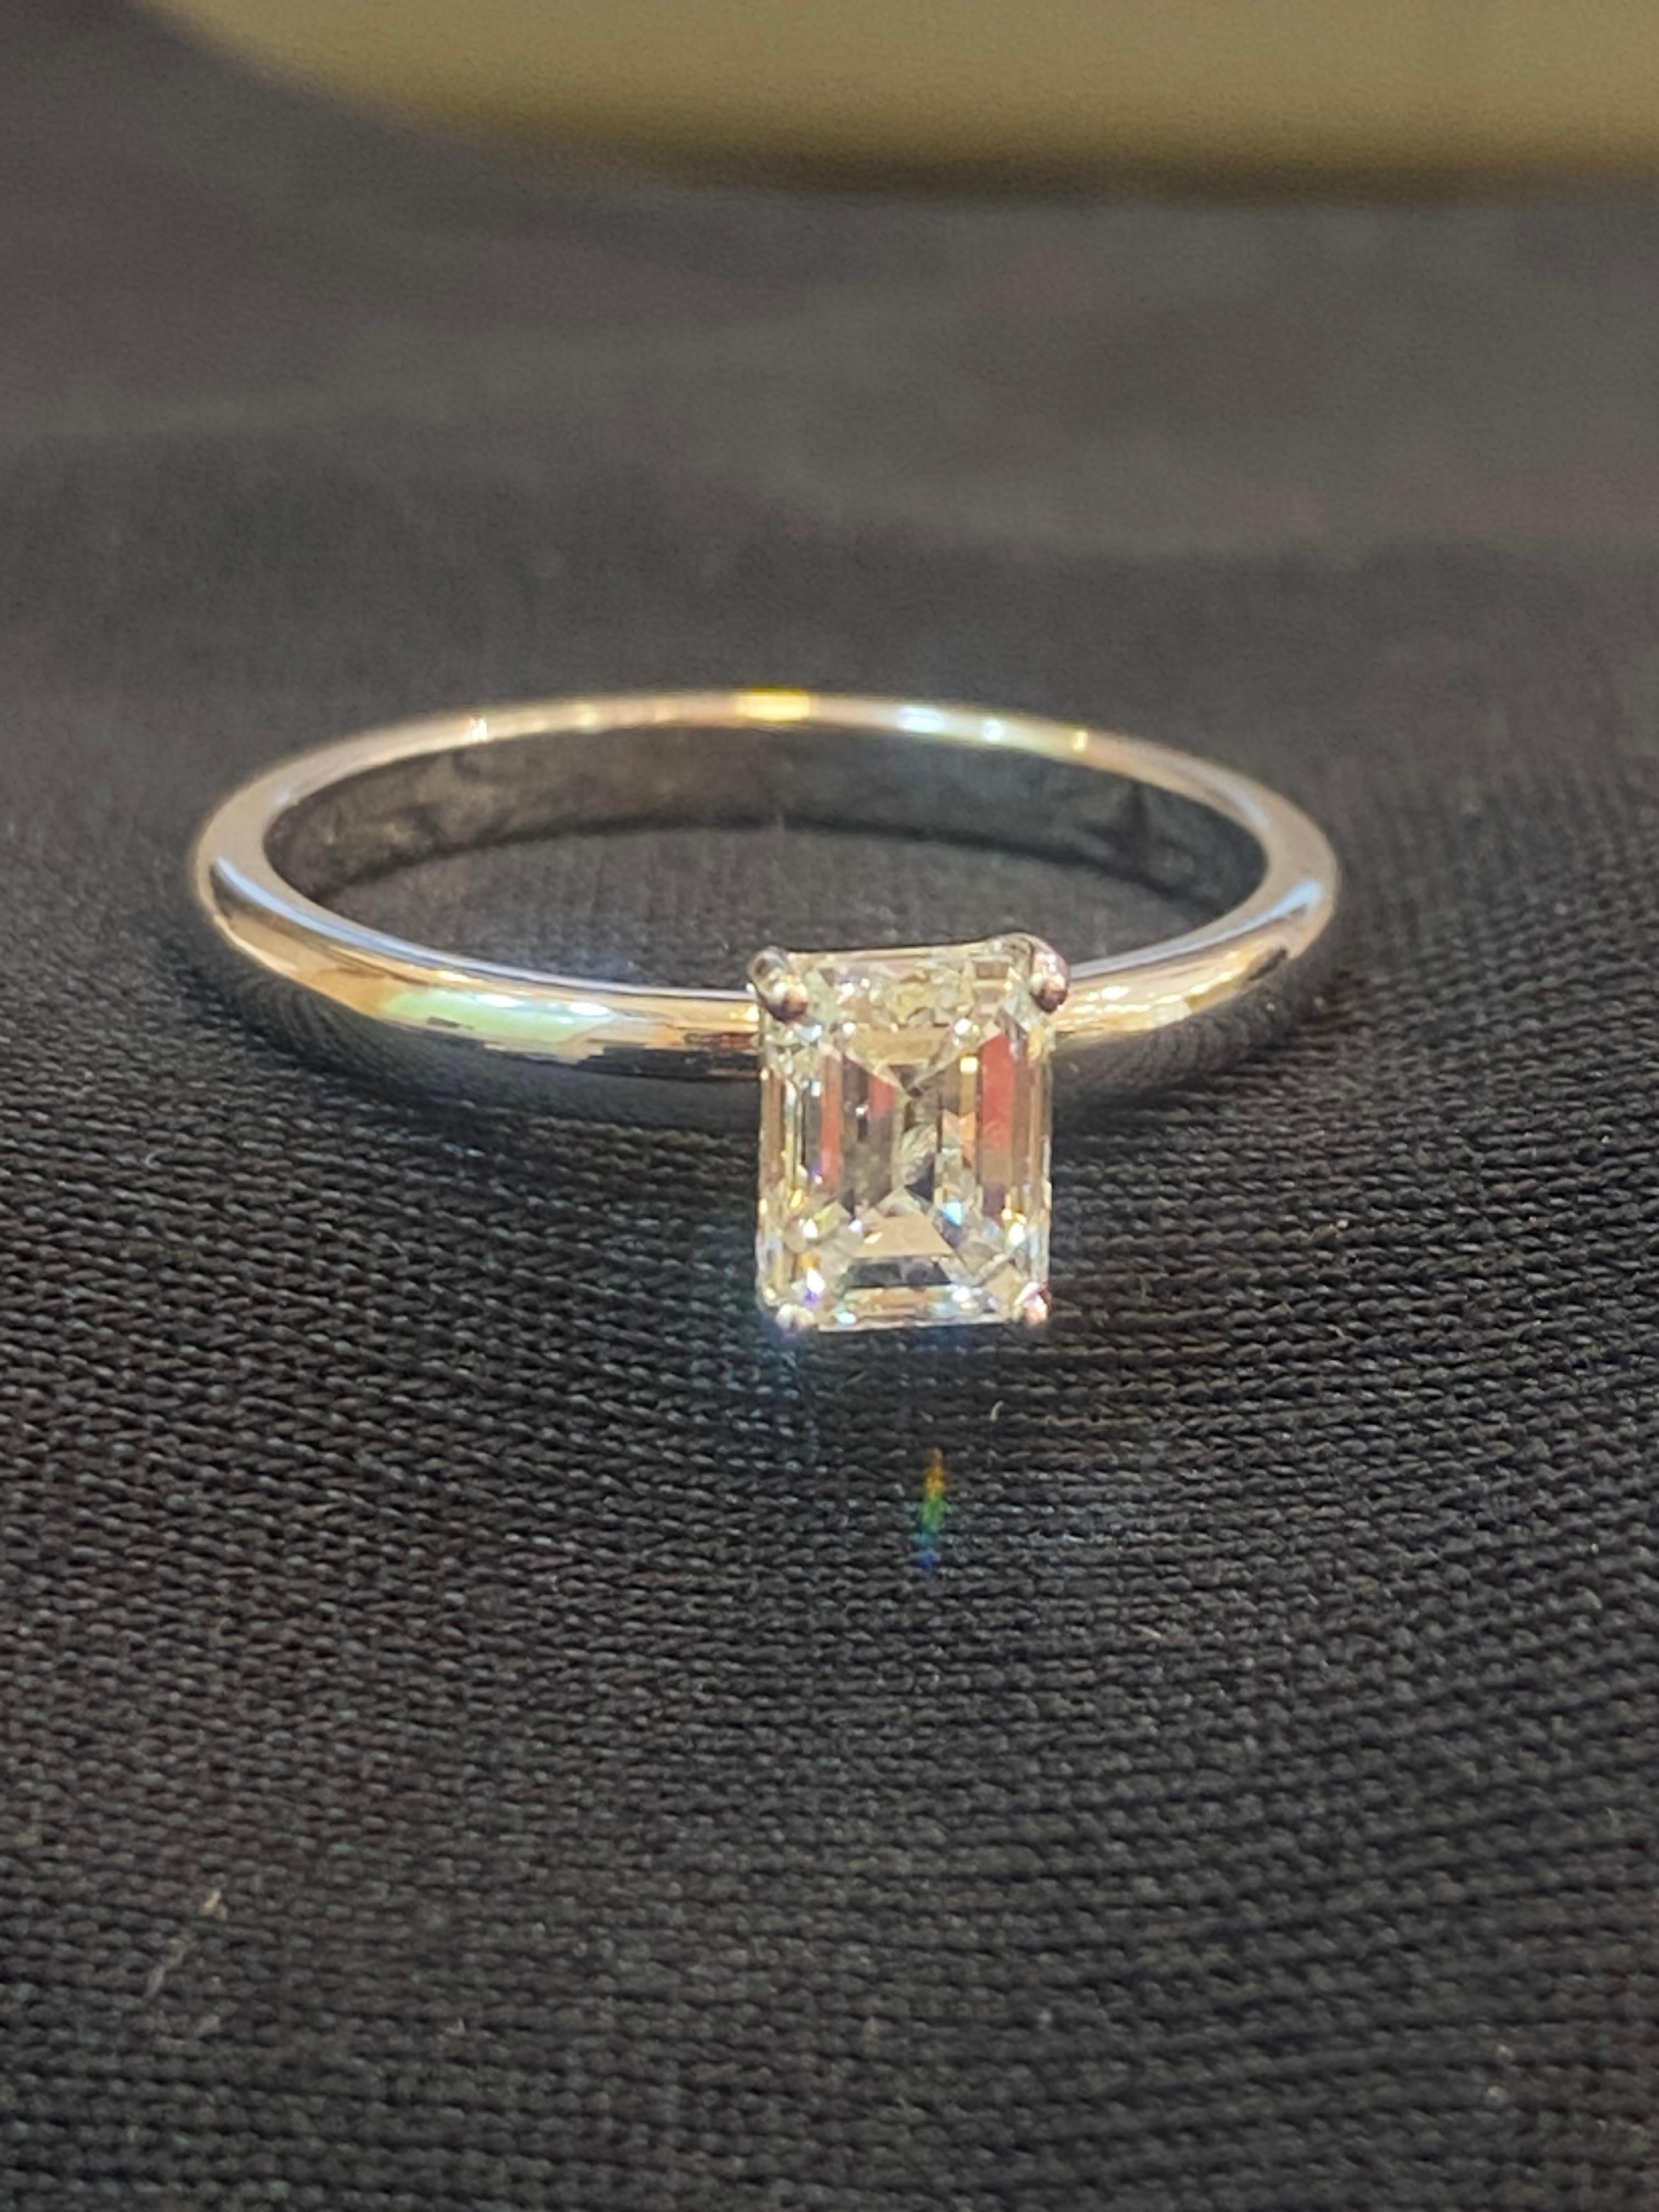 Create an everlasting bond with this exquisite ring featuring a GIA Certified 0.90 Carat G/VS2 Emerald Shape Diamond set in 18K White Gold. The perfect gift for any occasion!

Specifications : 

Ring Size : 6 (Custom Size Available)

Diamond Weight